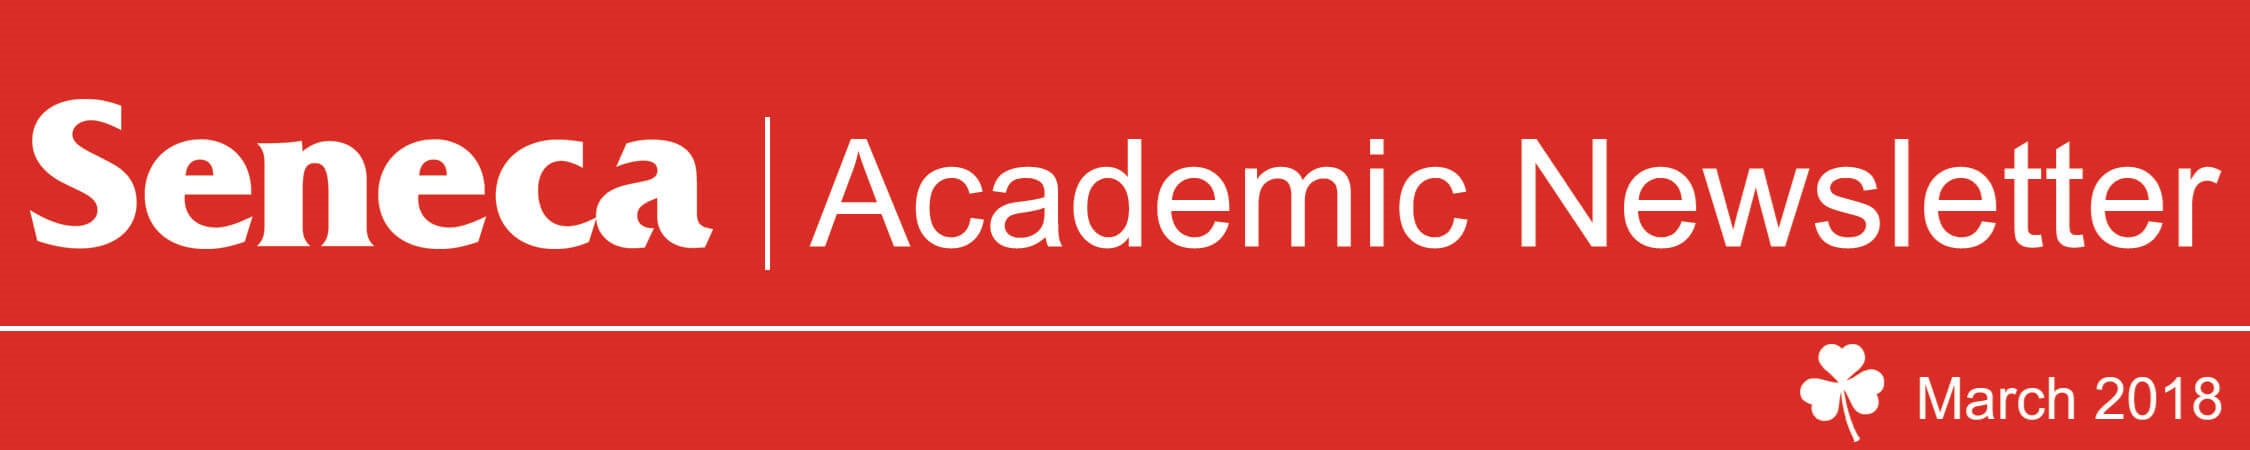 The header logo for the March 2018 issue of the Academic Newsletter